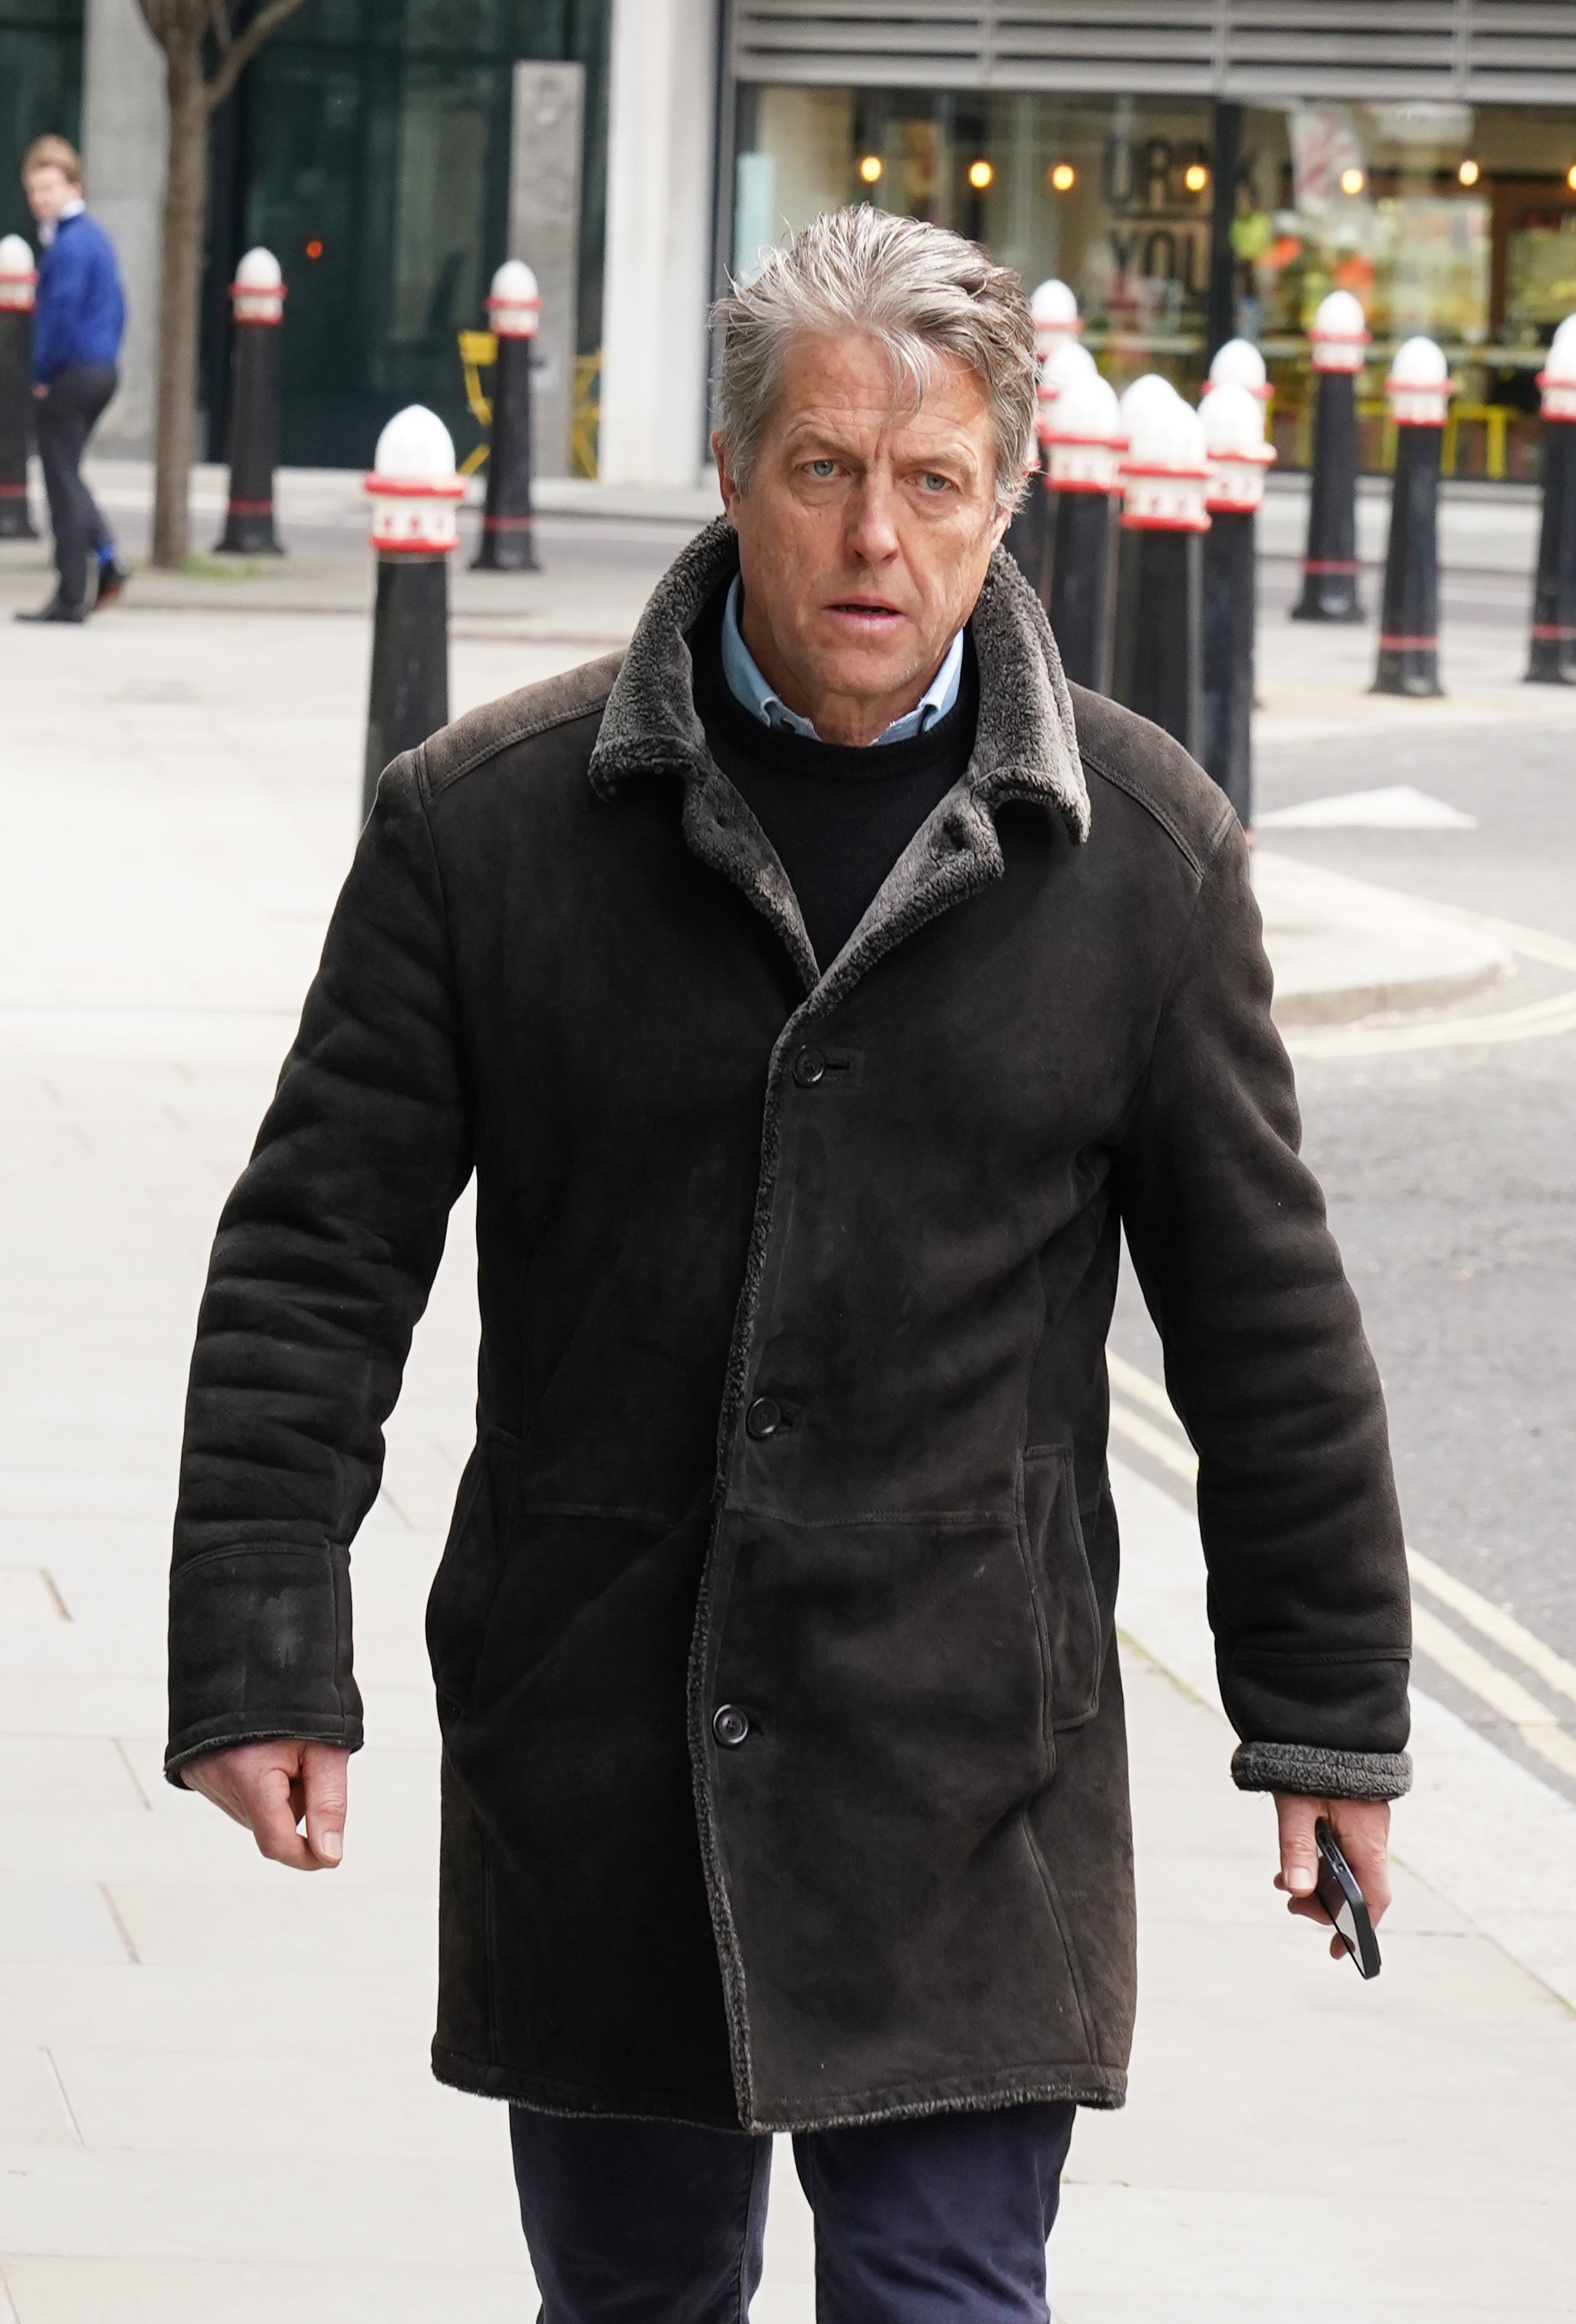 Hugh Grant is expected to attend court on Thursday